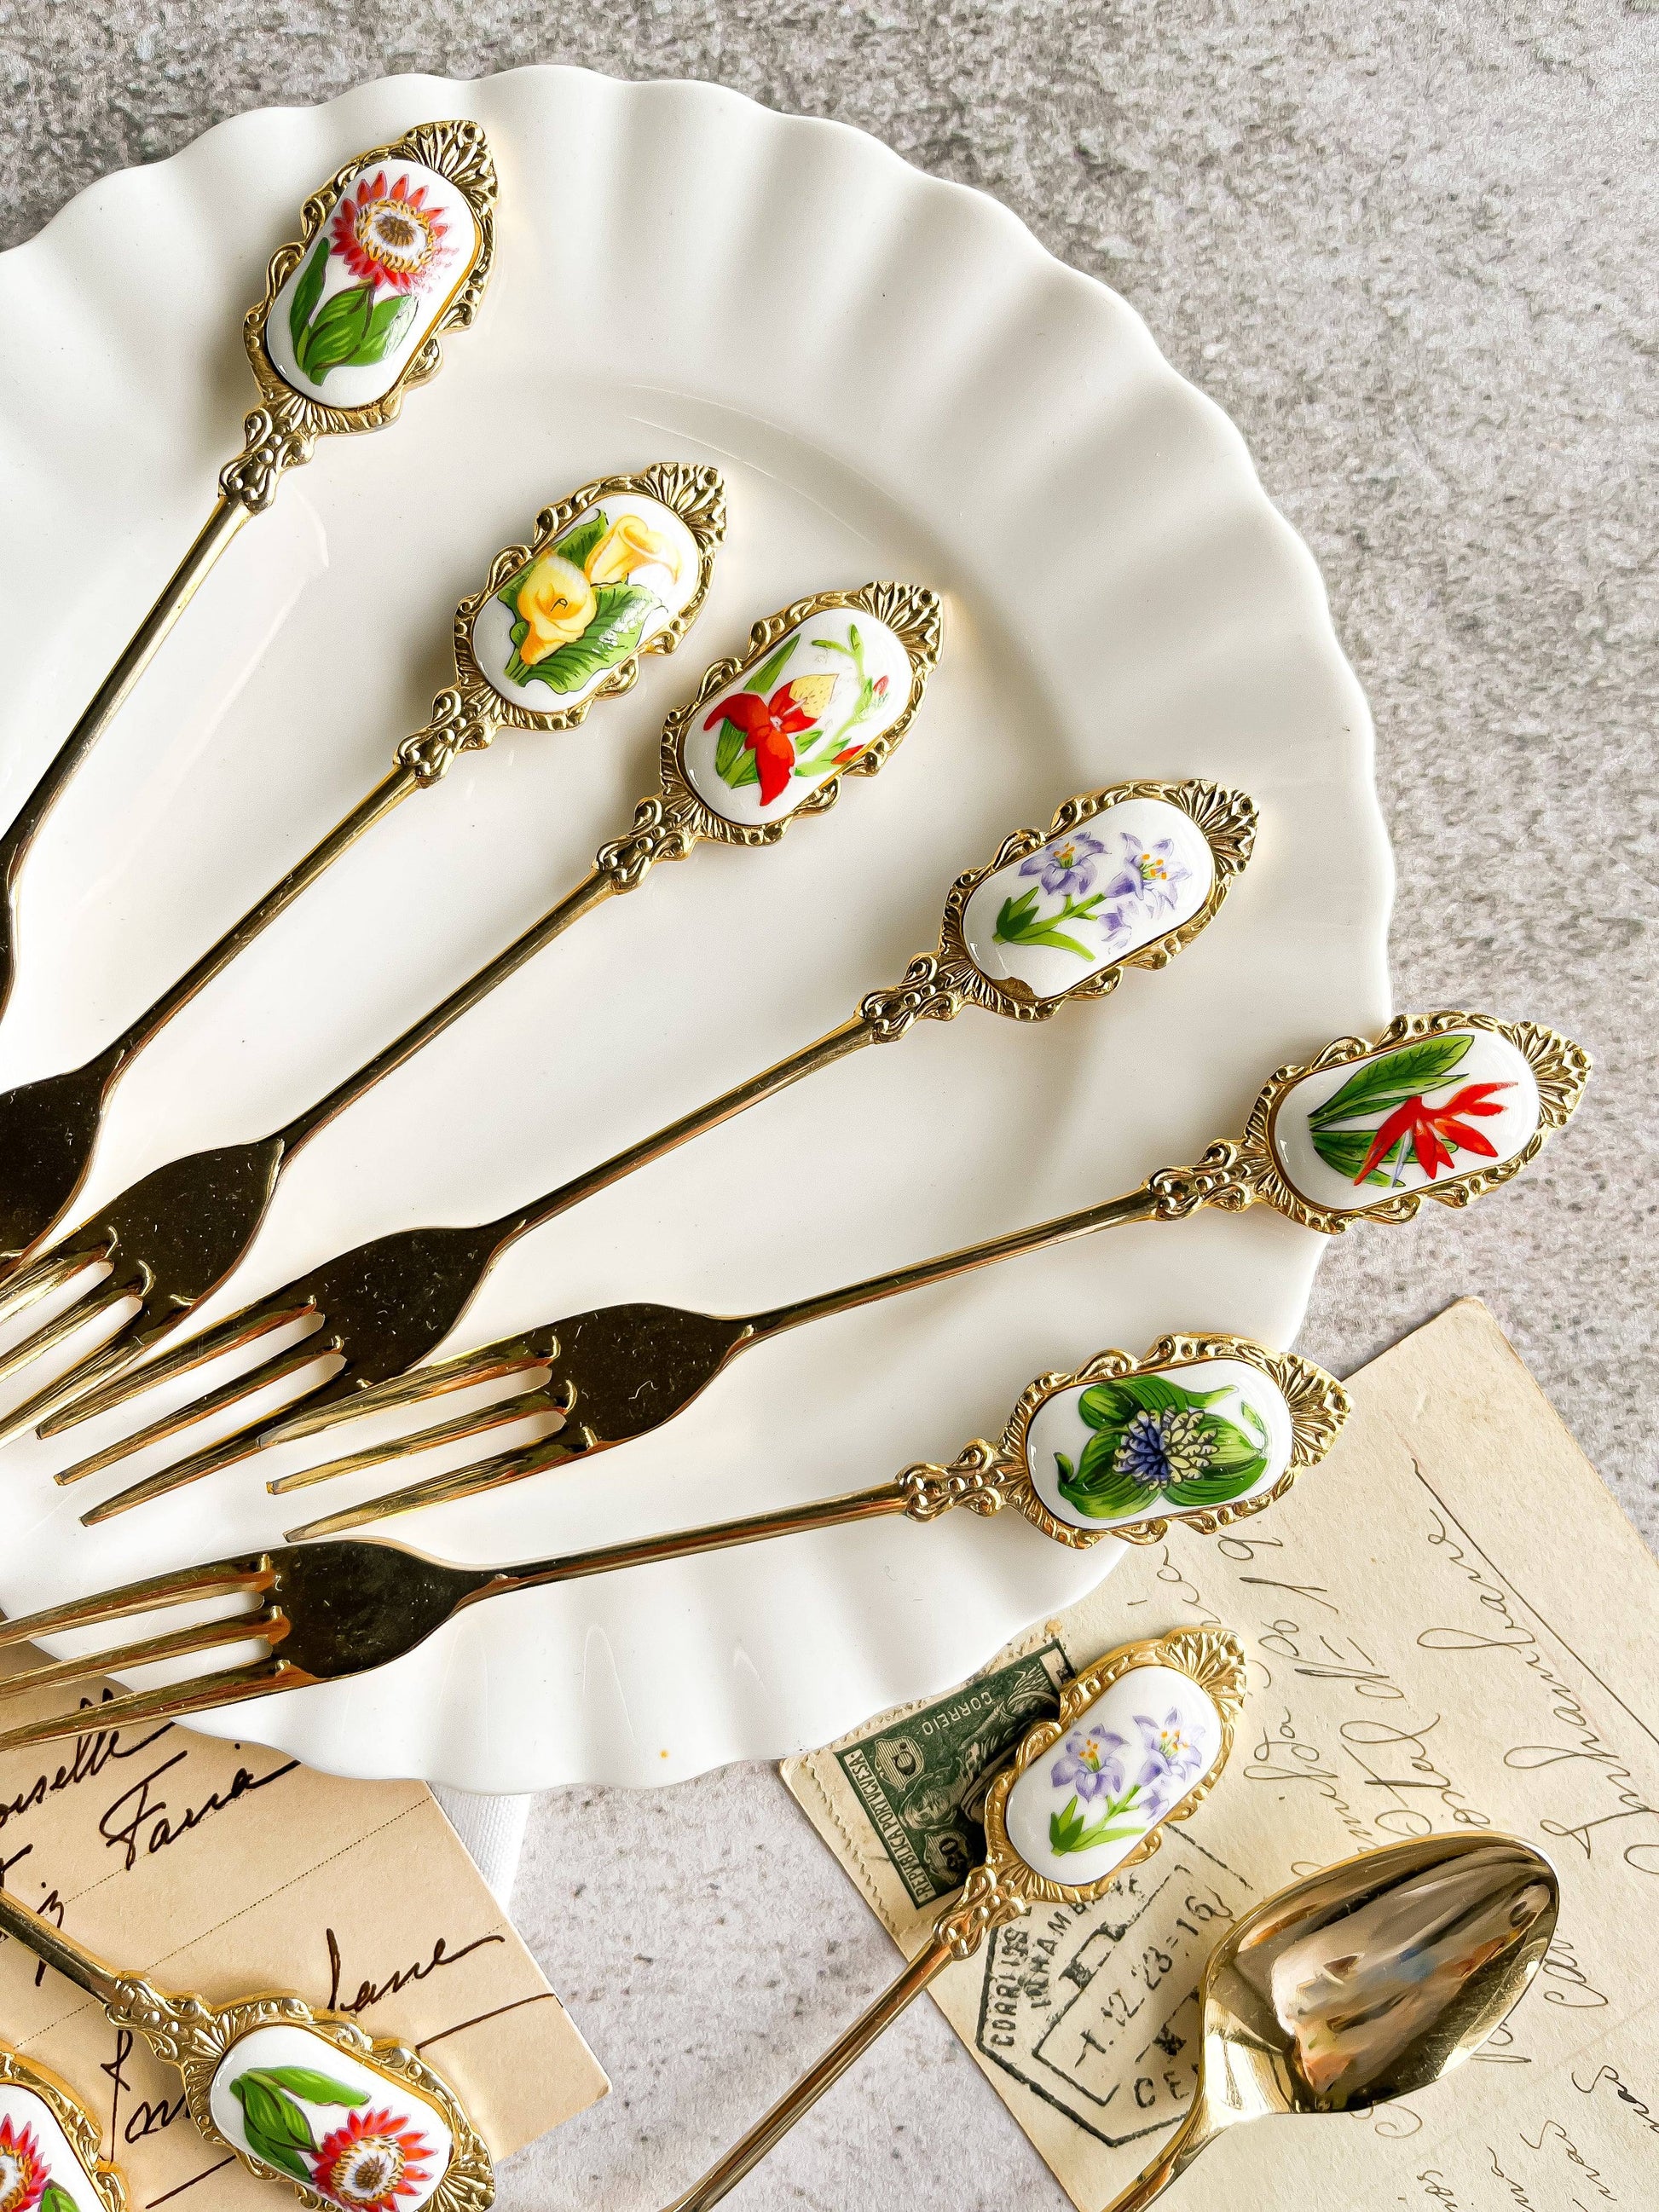 Gold-Plated Flatware Set with Floral Medallions - 6 Teaspoons, 6 Cake Forks, 1 Sugar Spoon in Decorative Box - SOSC Home